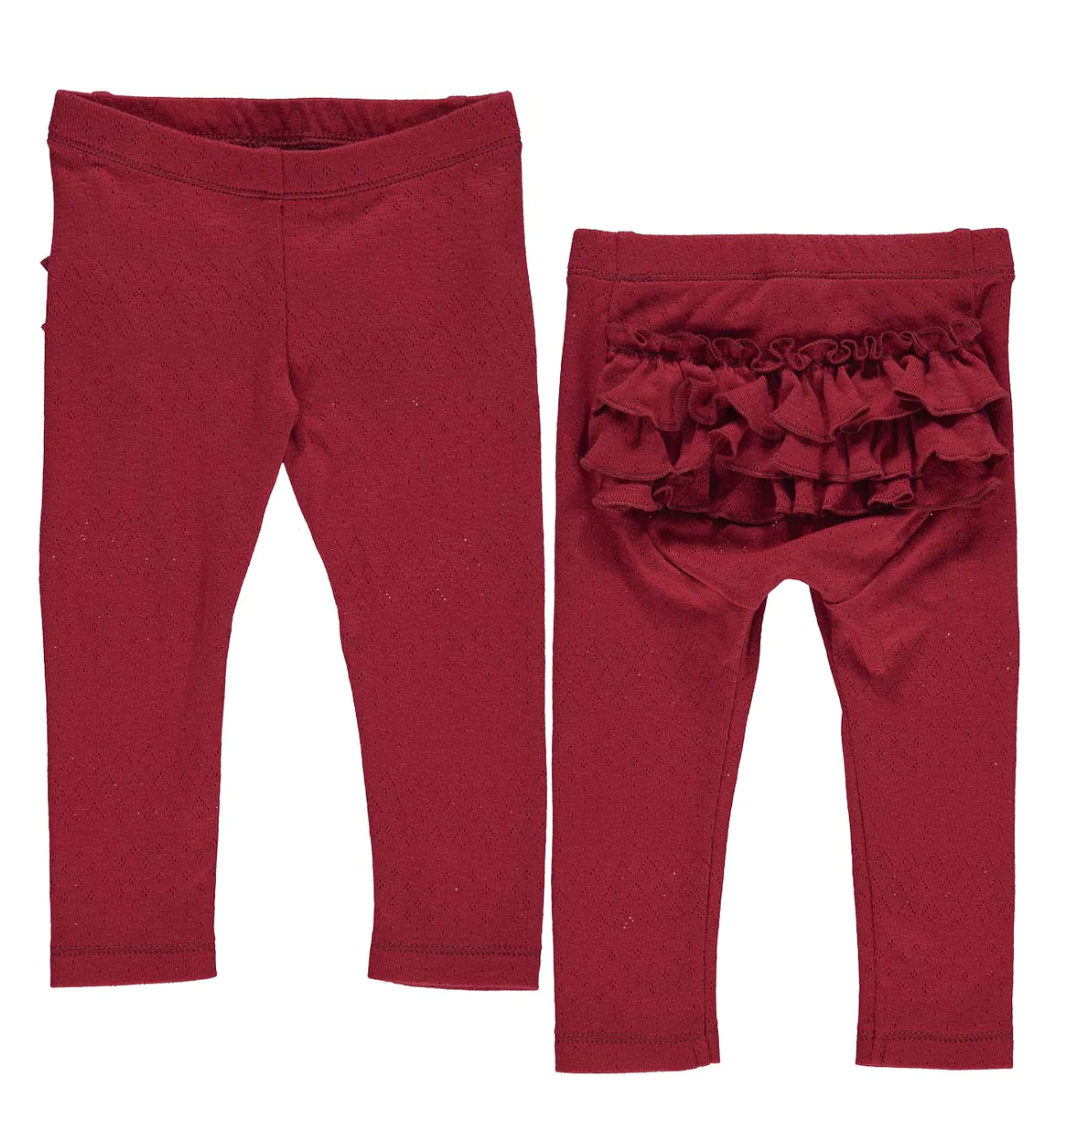 POINTEL frill pants - Berry Red